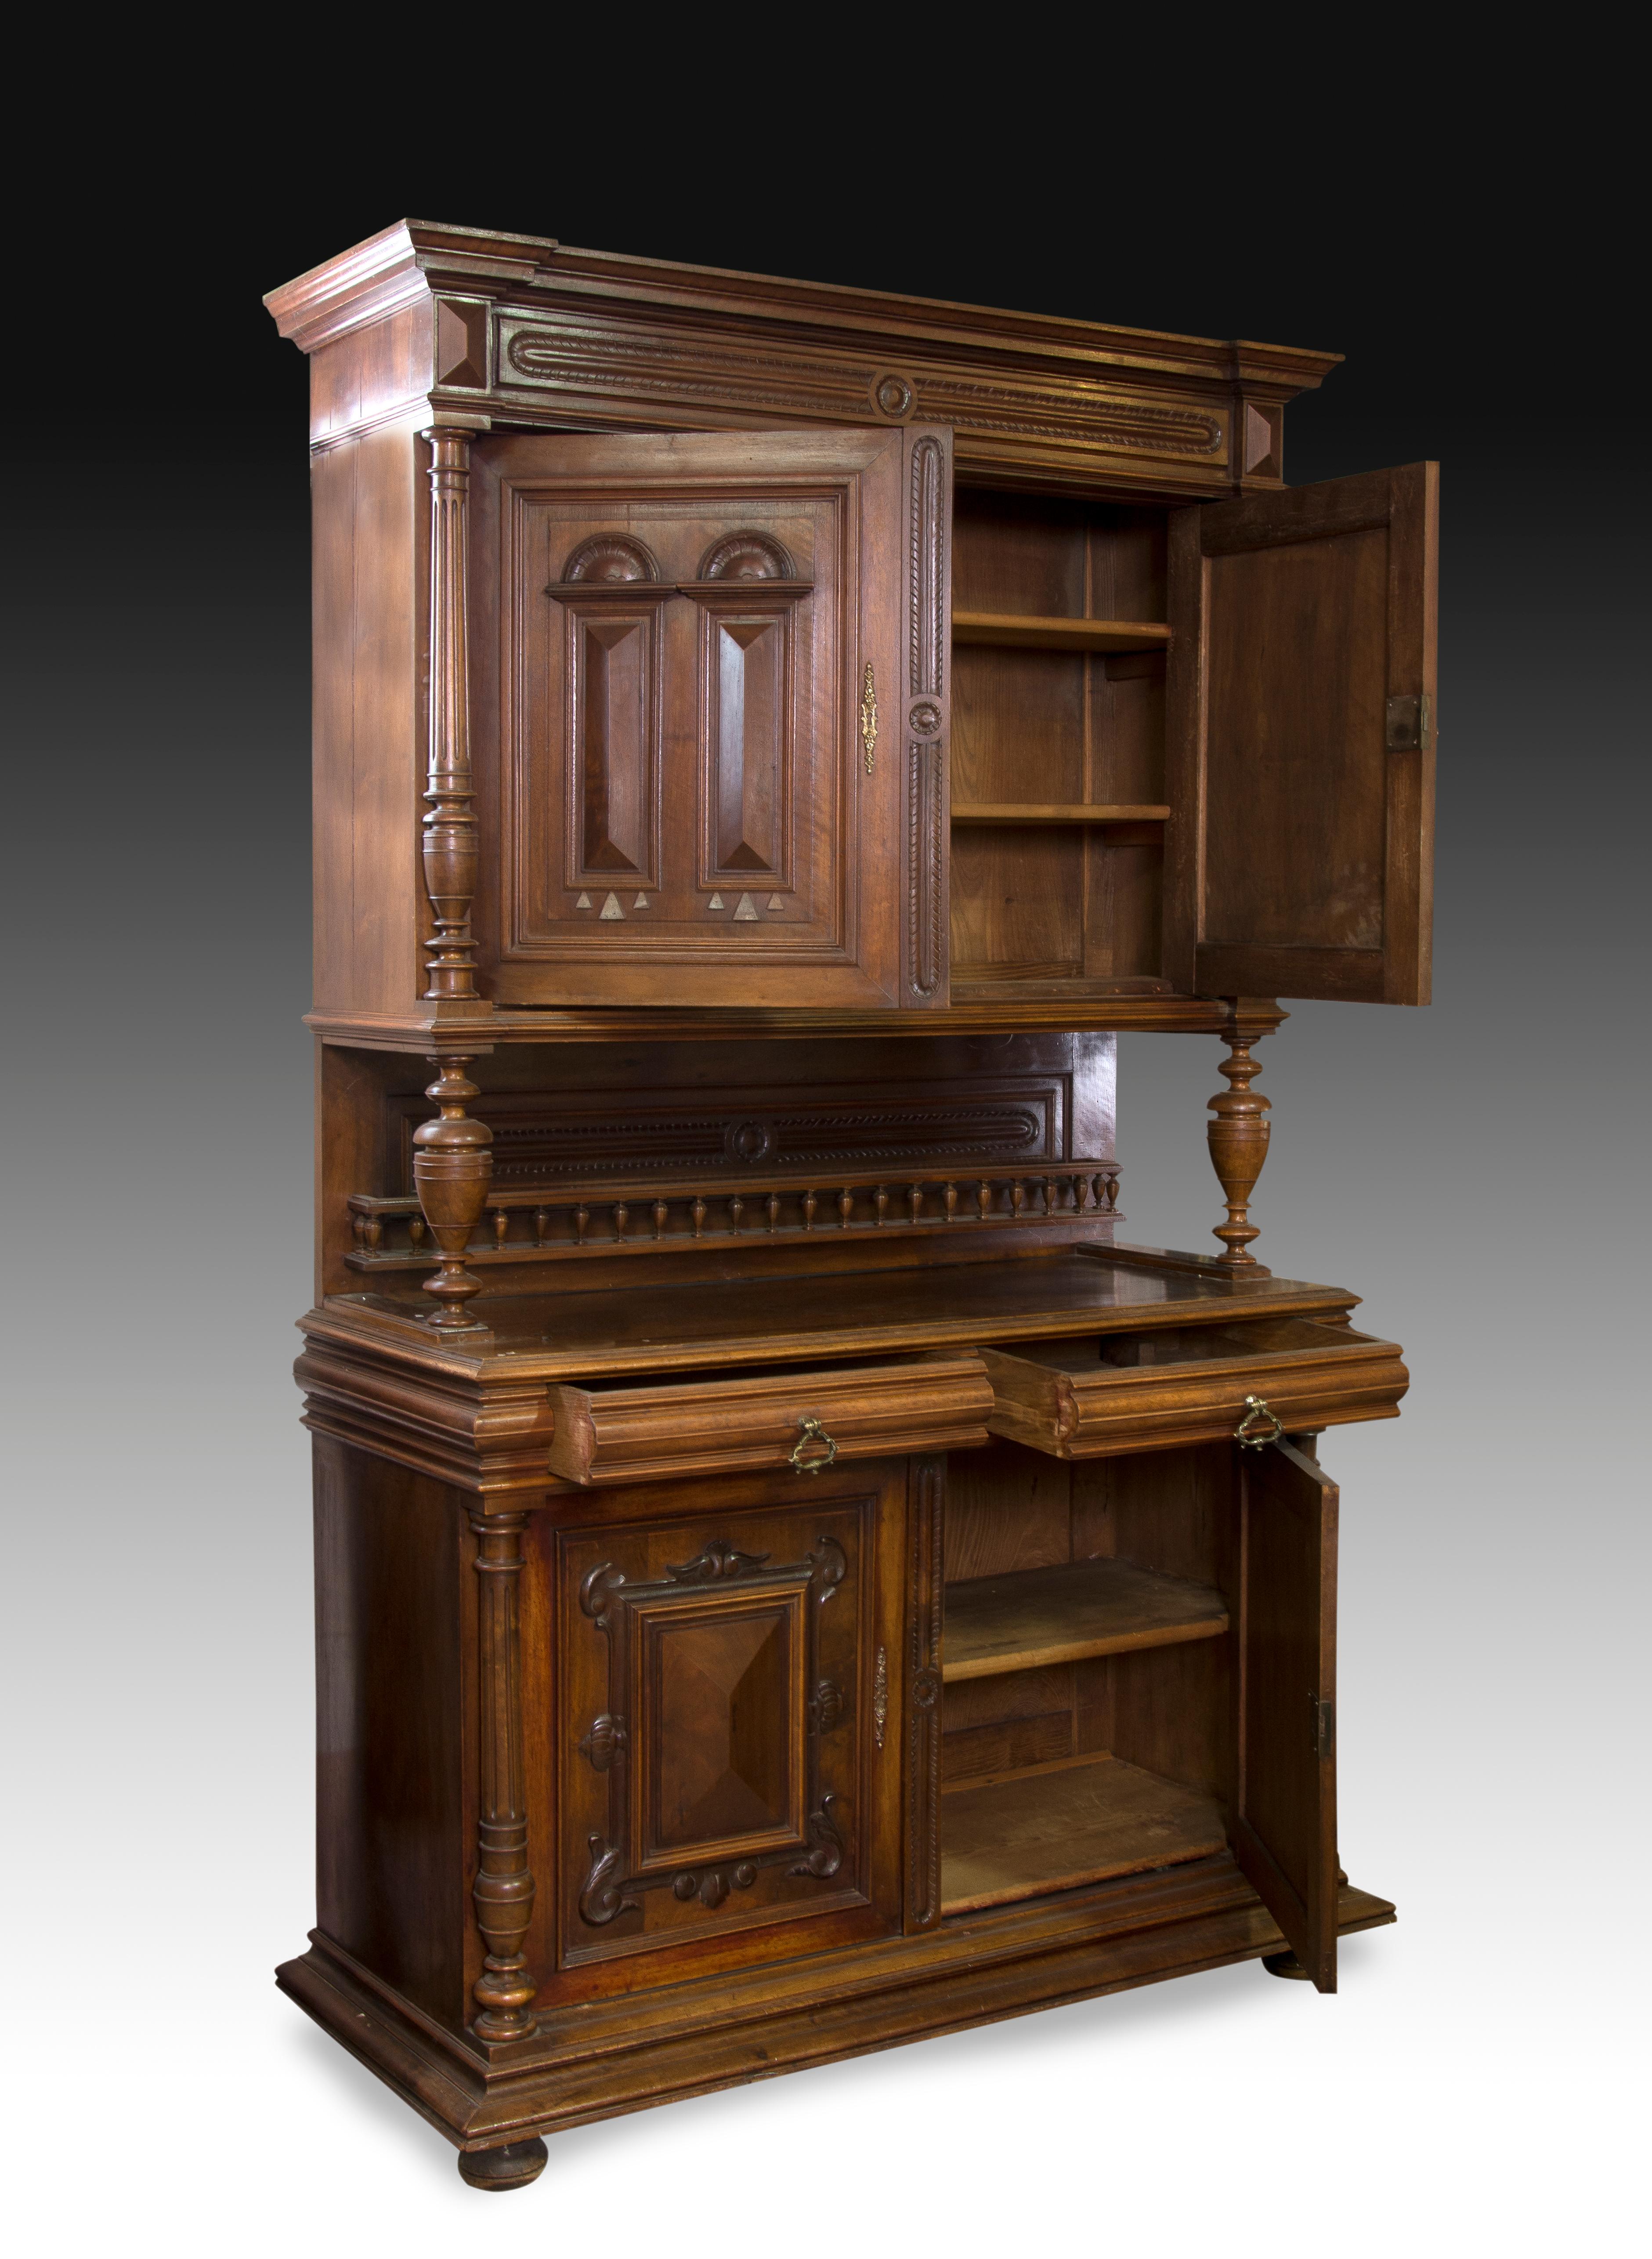 Double body cupboard with decorated front made of carved walnut wood. The lower body has a decoration on both doors, enhanced with columns on the sides; Similar composition is found in the upper body, varying the decorative theme of the doors. In